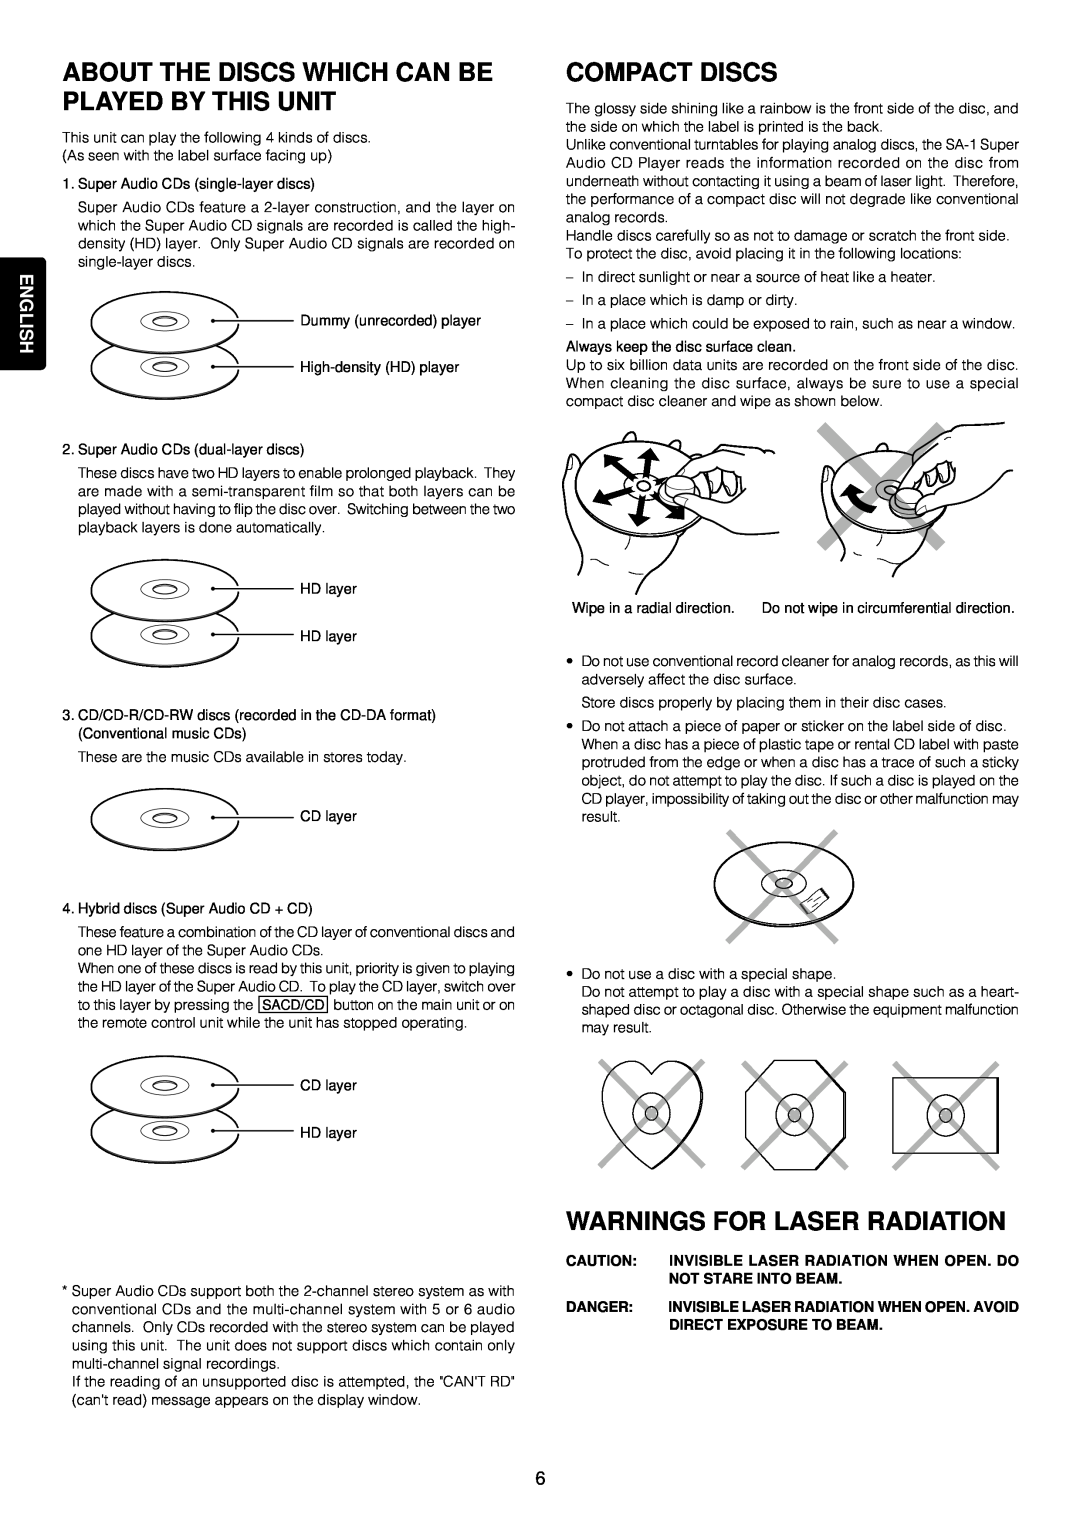 Marantz SA-14 manual About The Discs Which Can Be Played By This Unit, Compact Discs, Warnings For Laser Radiation, English 